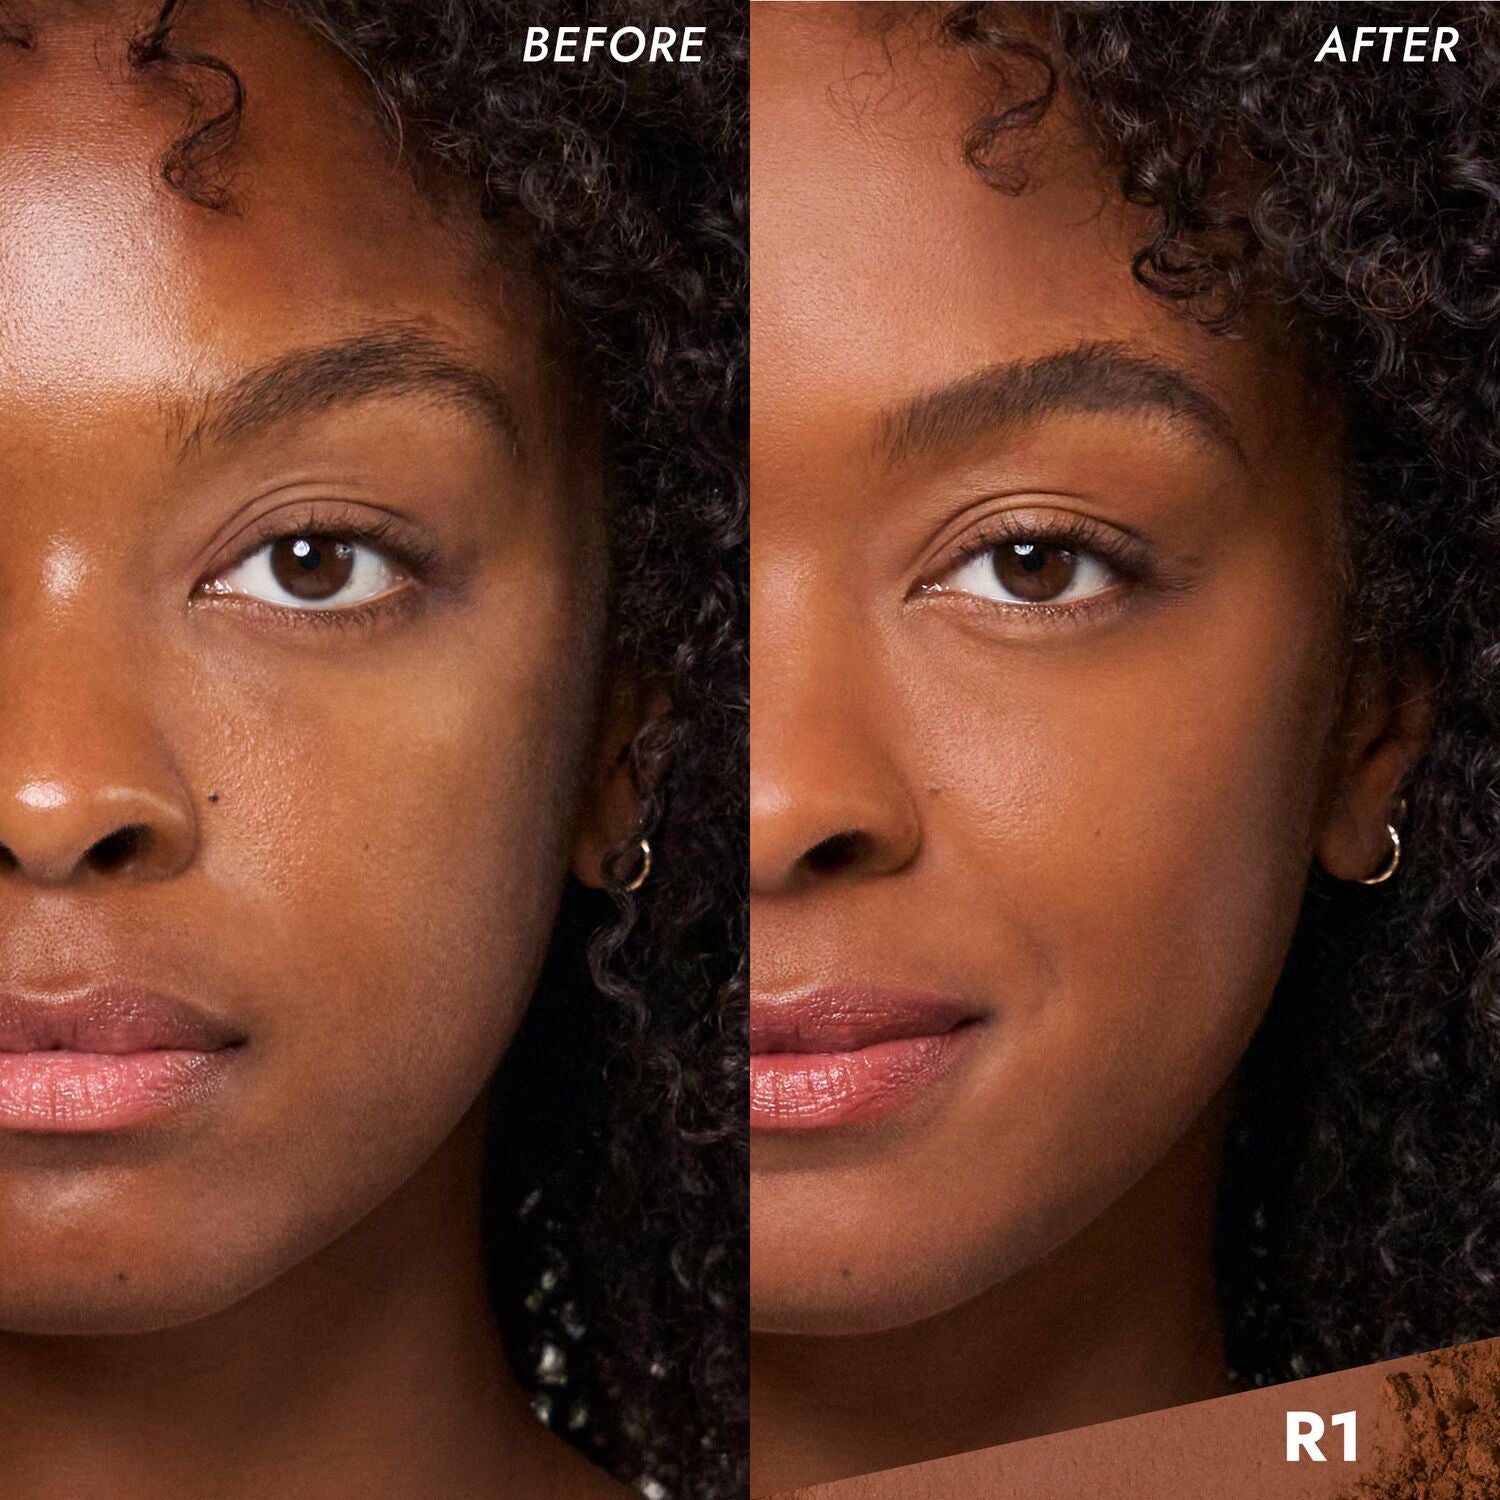 Coverfx Pressed Mineral Foundation model before and after image in shade  R1